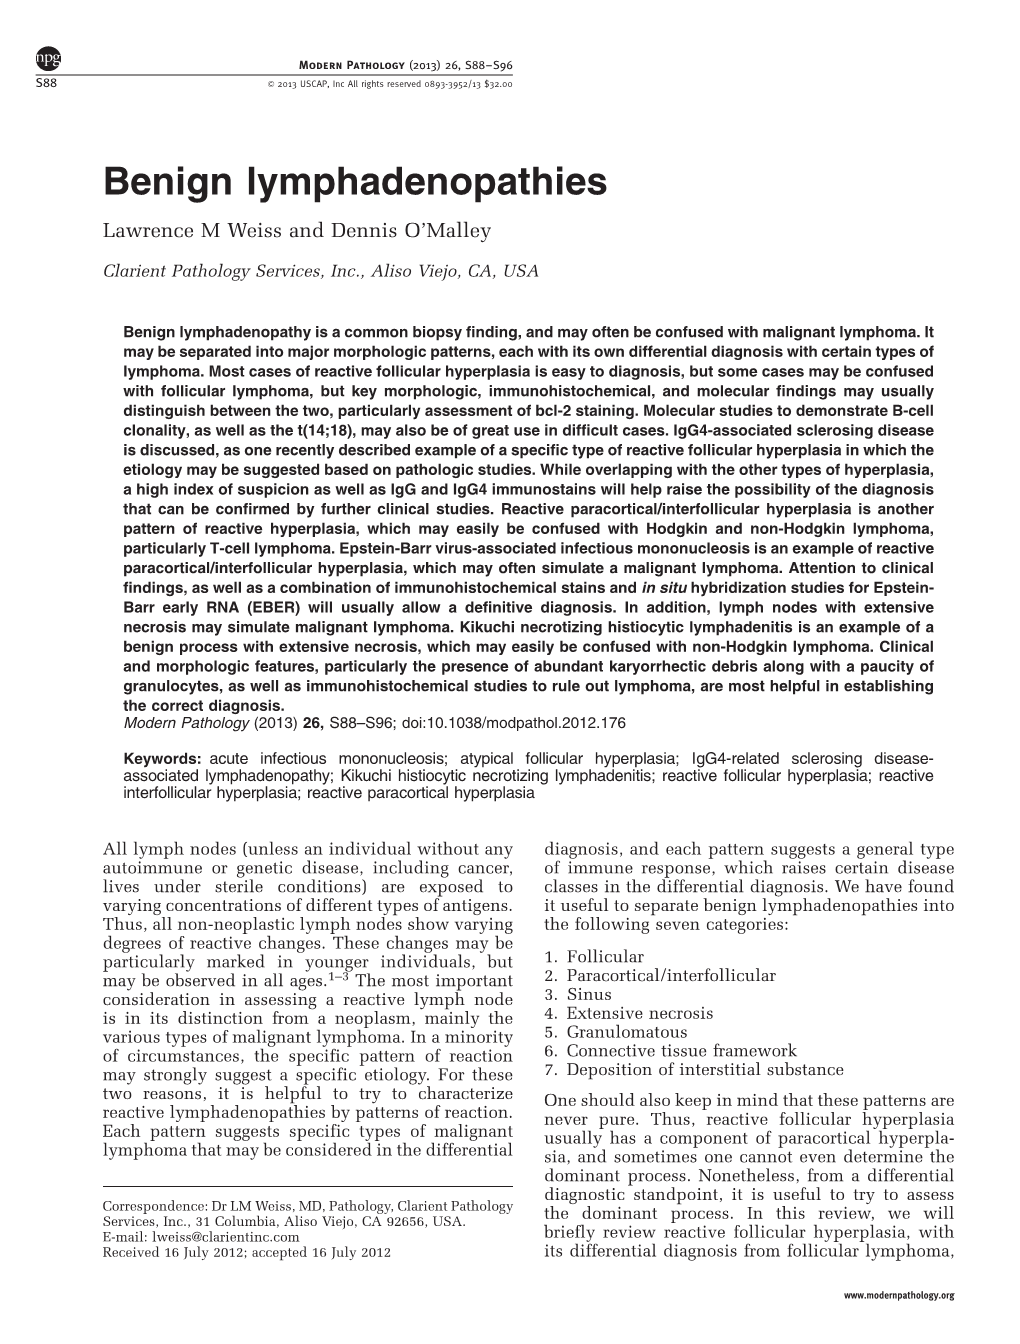 Benign Lymphadenopathies Lawrence M Weiss and Dennis O’Malley